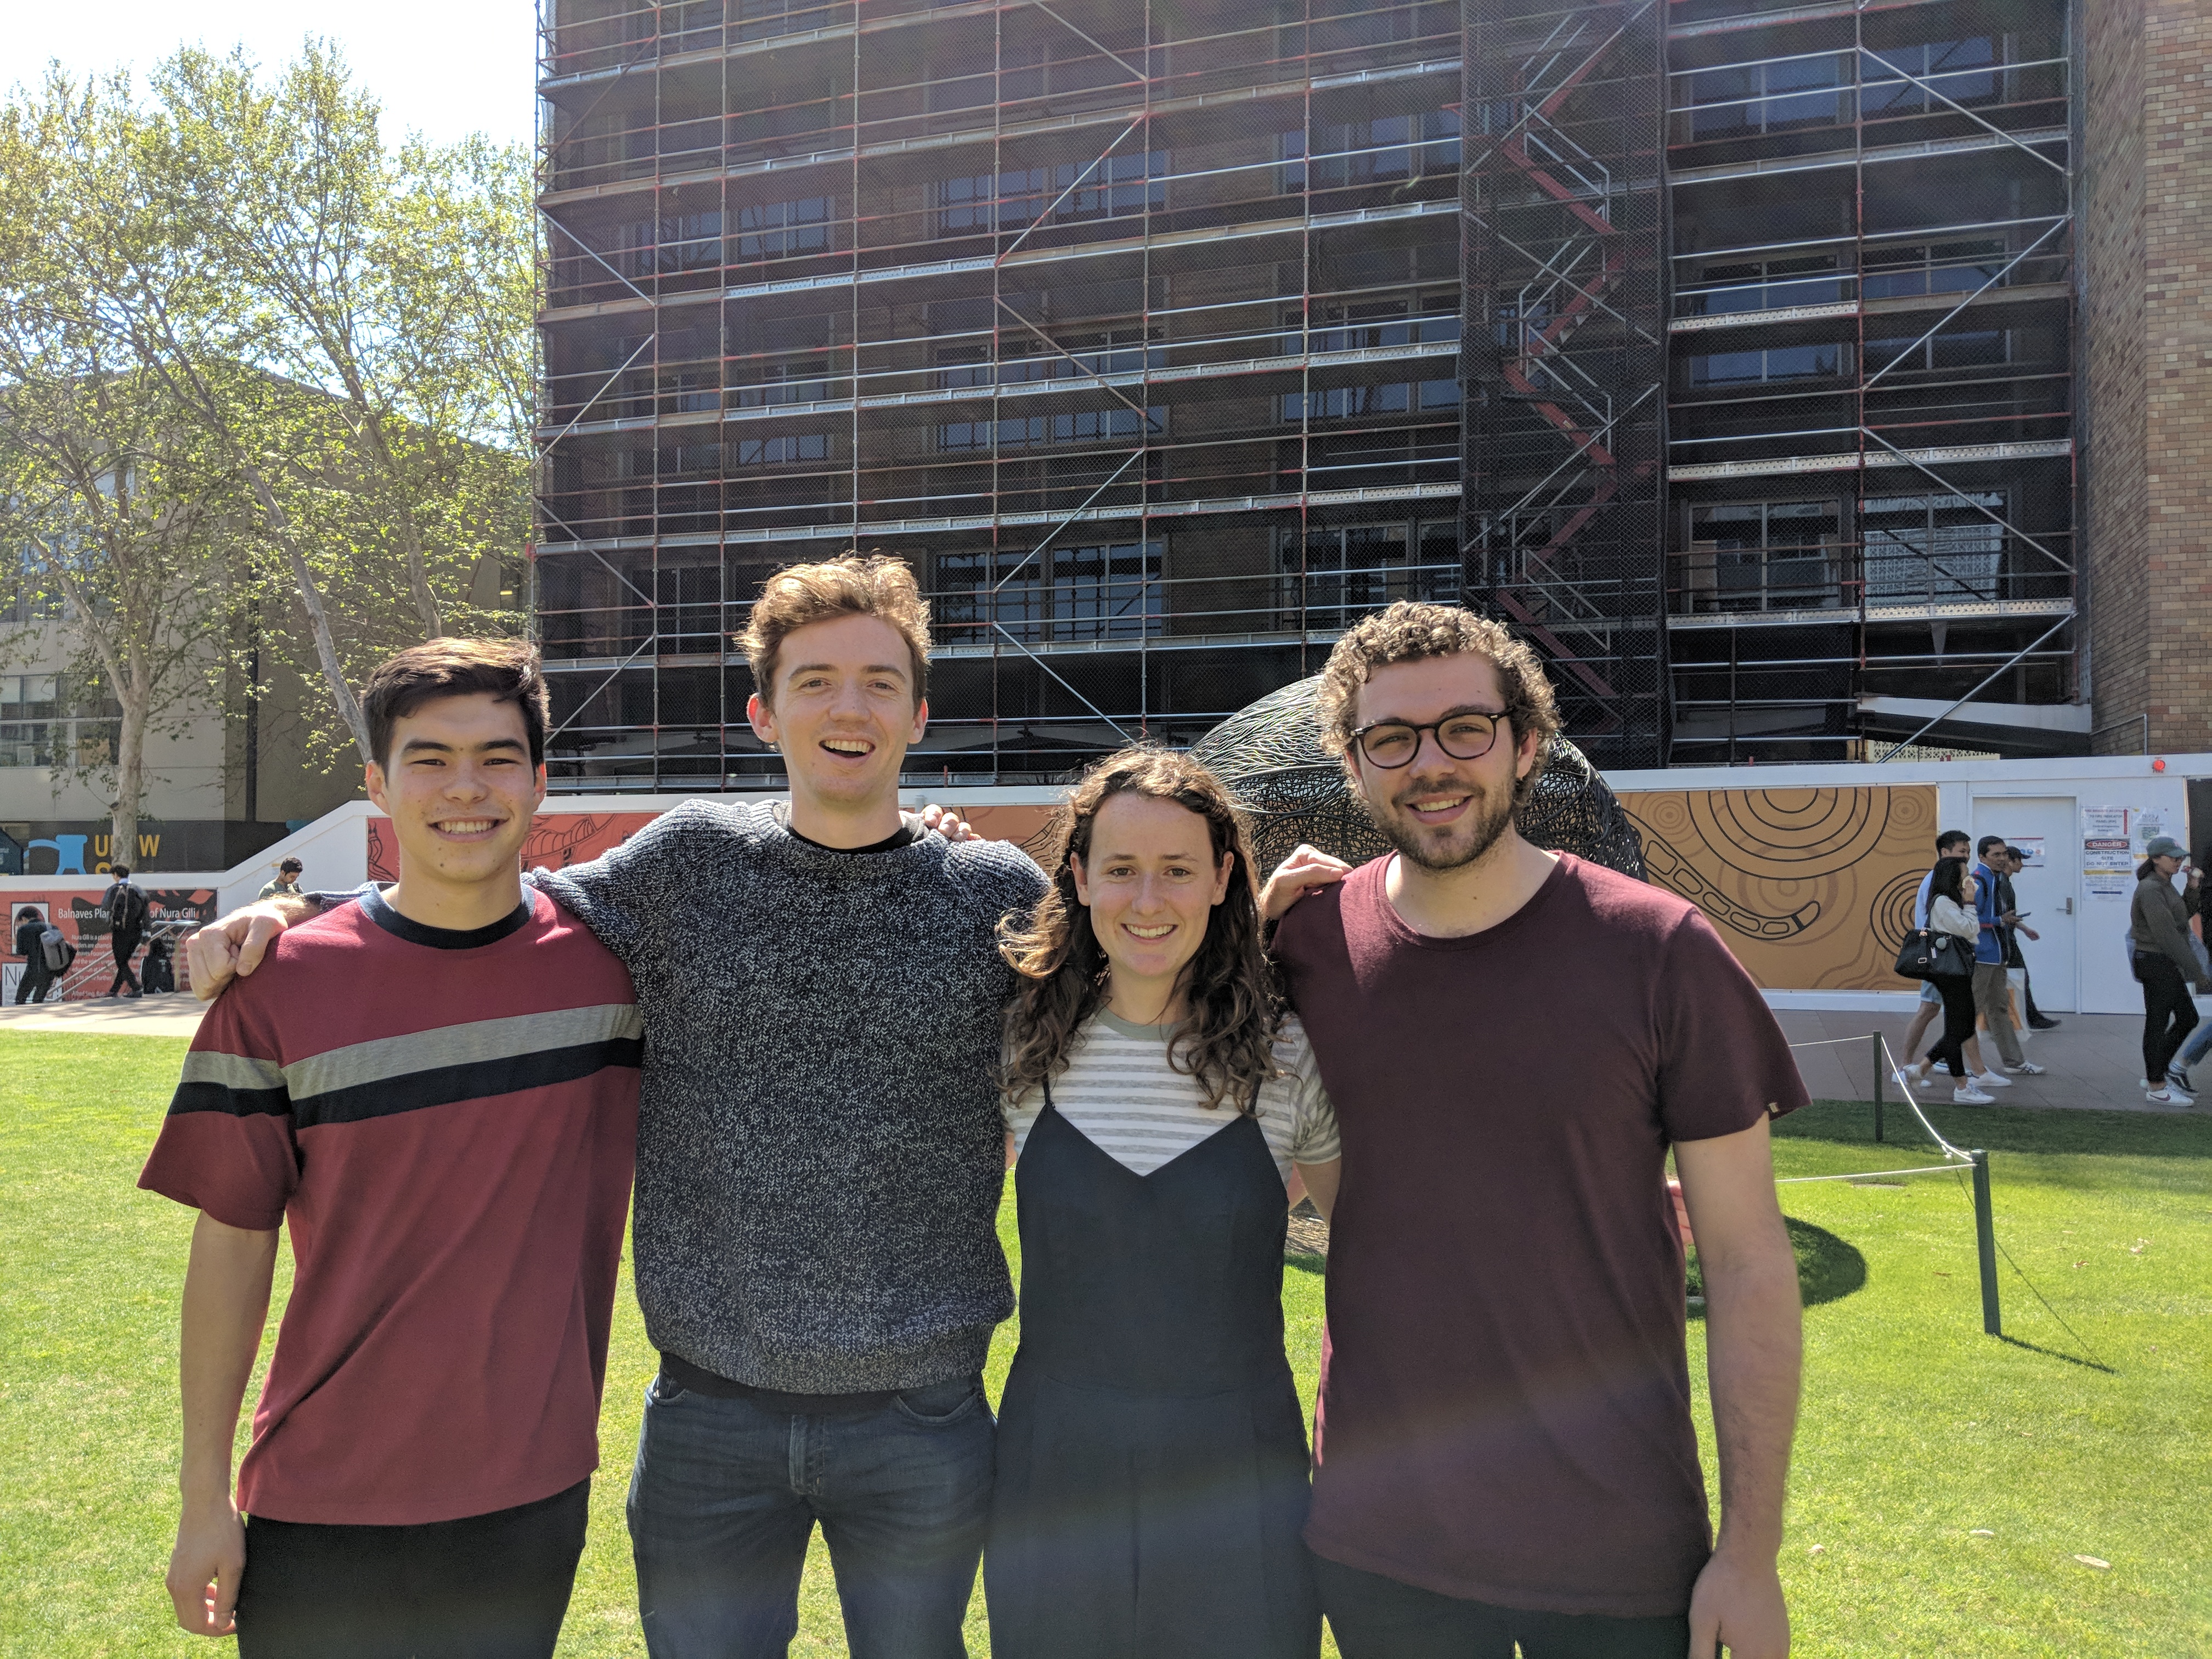 The team behind Snack, which took out three Peter Farrell Cup prizes: (left to right) Hugh Chan (Engineering), Jake Fitzgerald (Engineering), Clementine Rocks (Art & Design) and Hamish Elliot (Engineering).